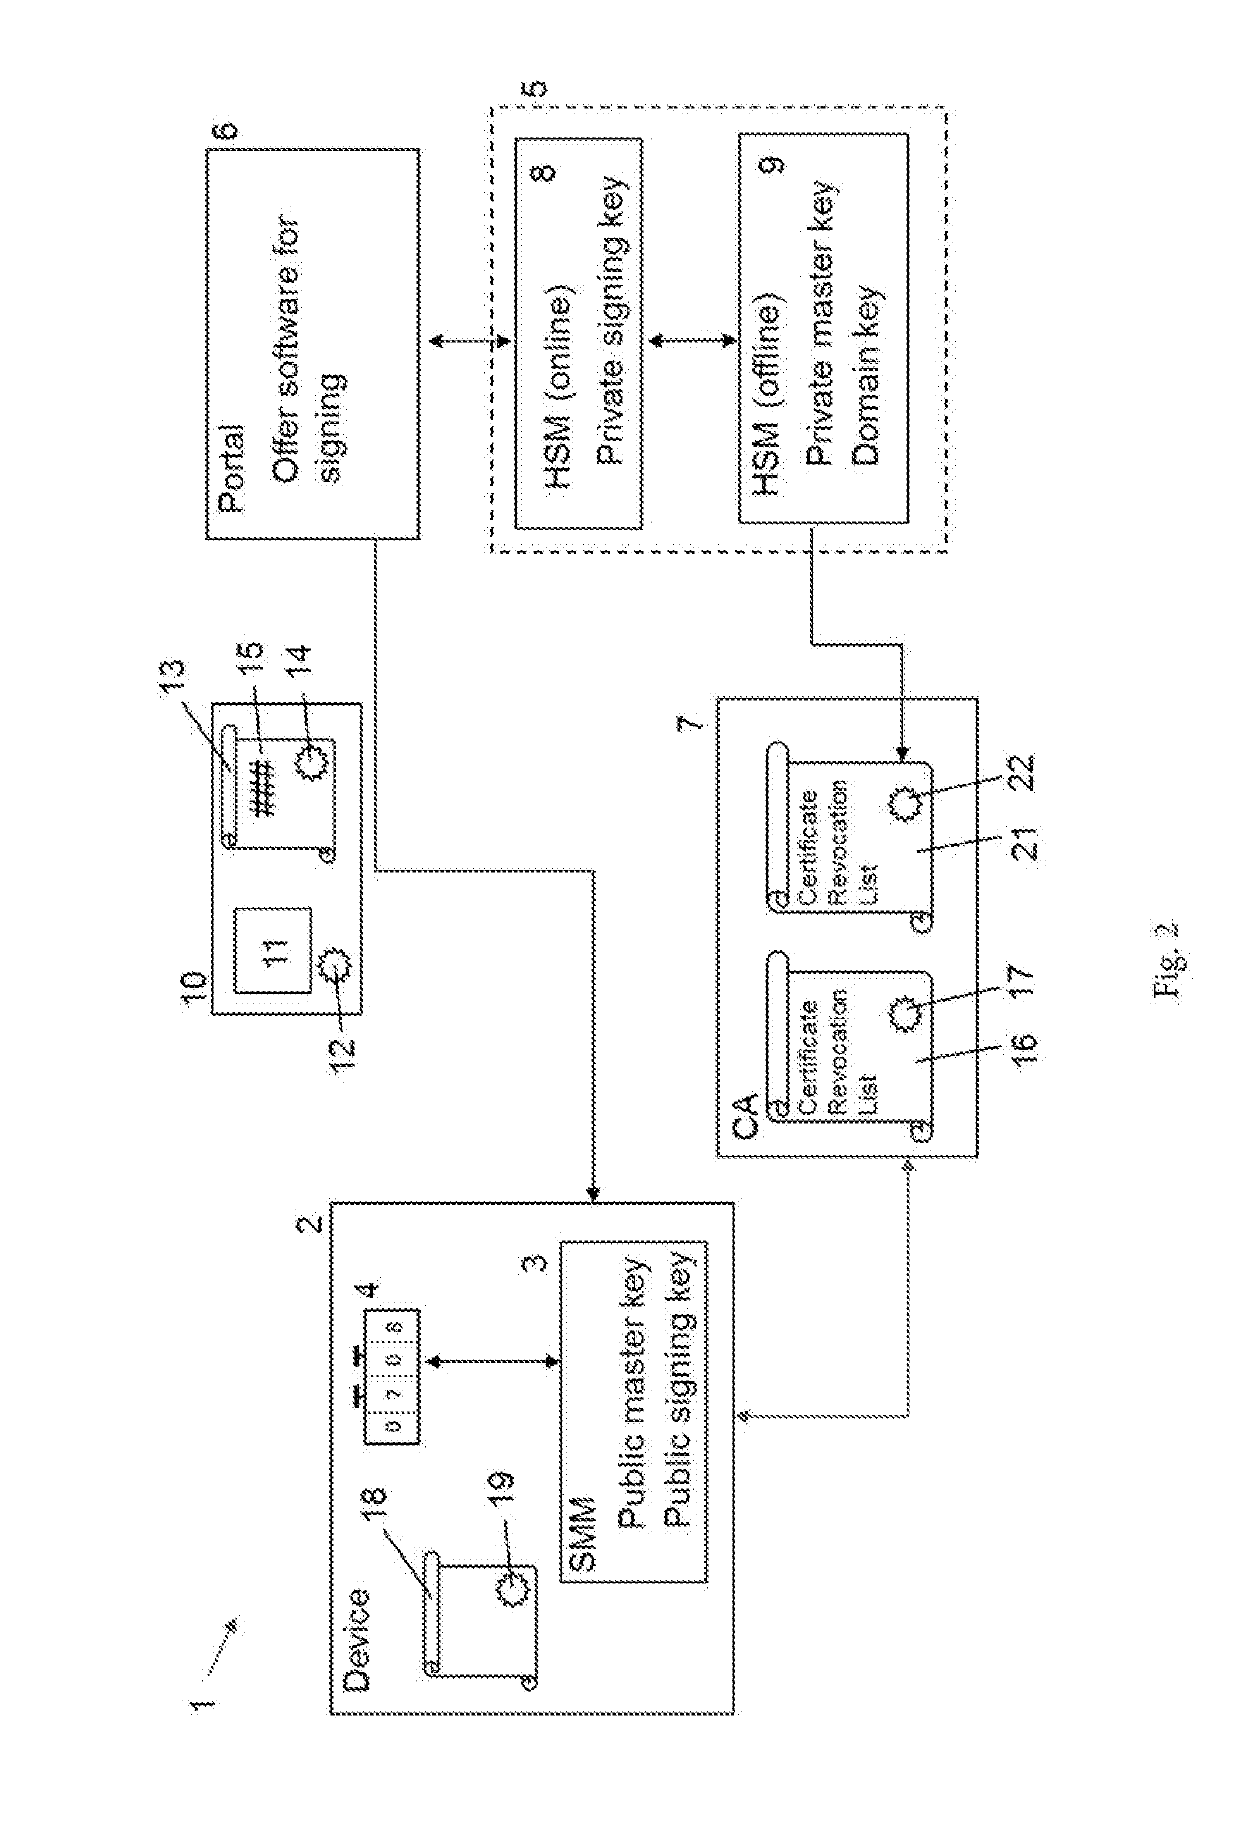 Method for providing a firmware update of a device